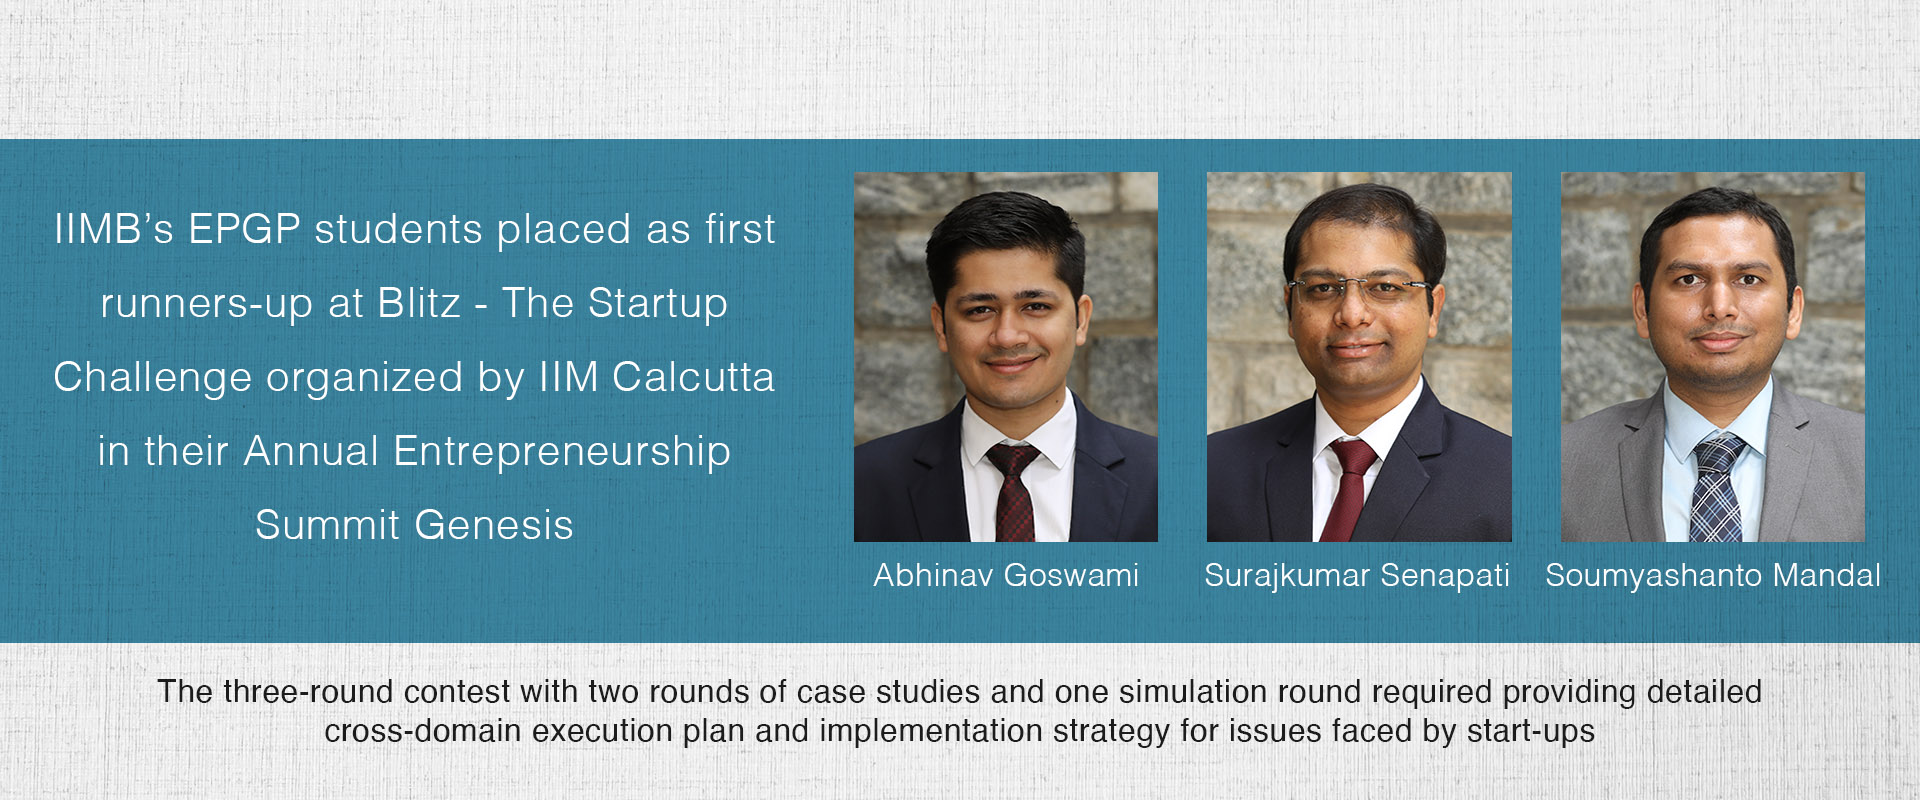 IIMB’s EPGP students placed as first runners-up at Blitz - The Startup Challenge organized by IIM Calcutta in their Annual Entrepreneurship Summit Genesis